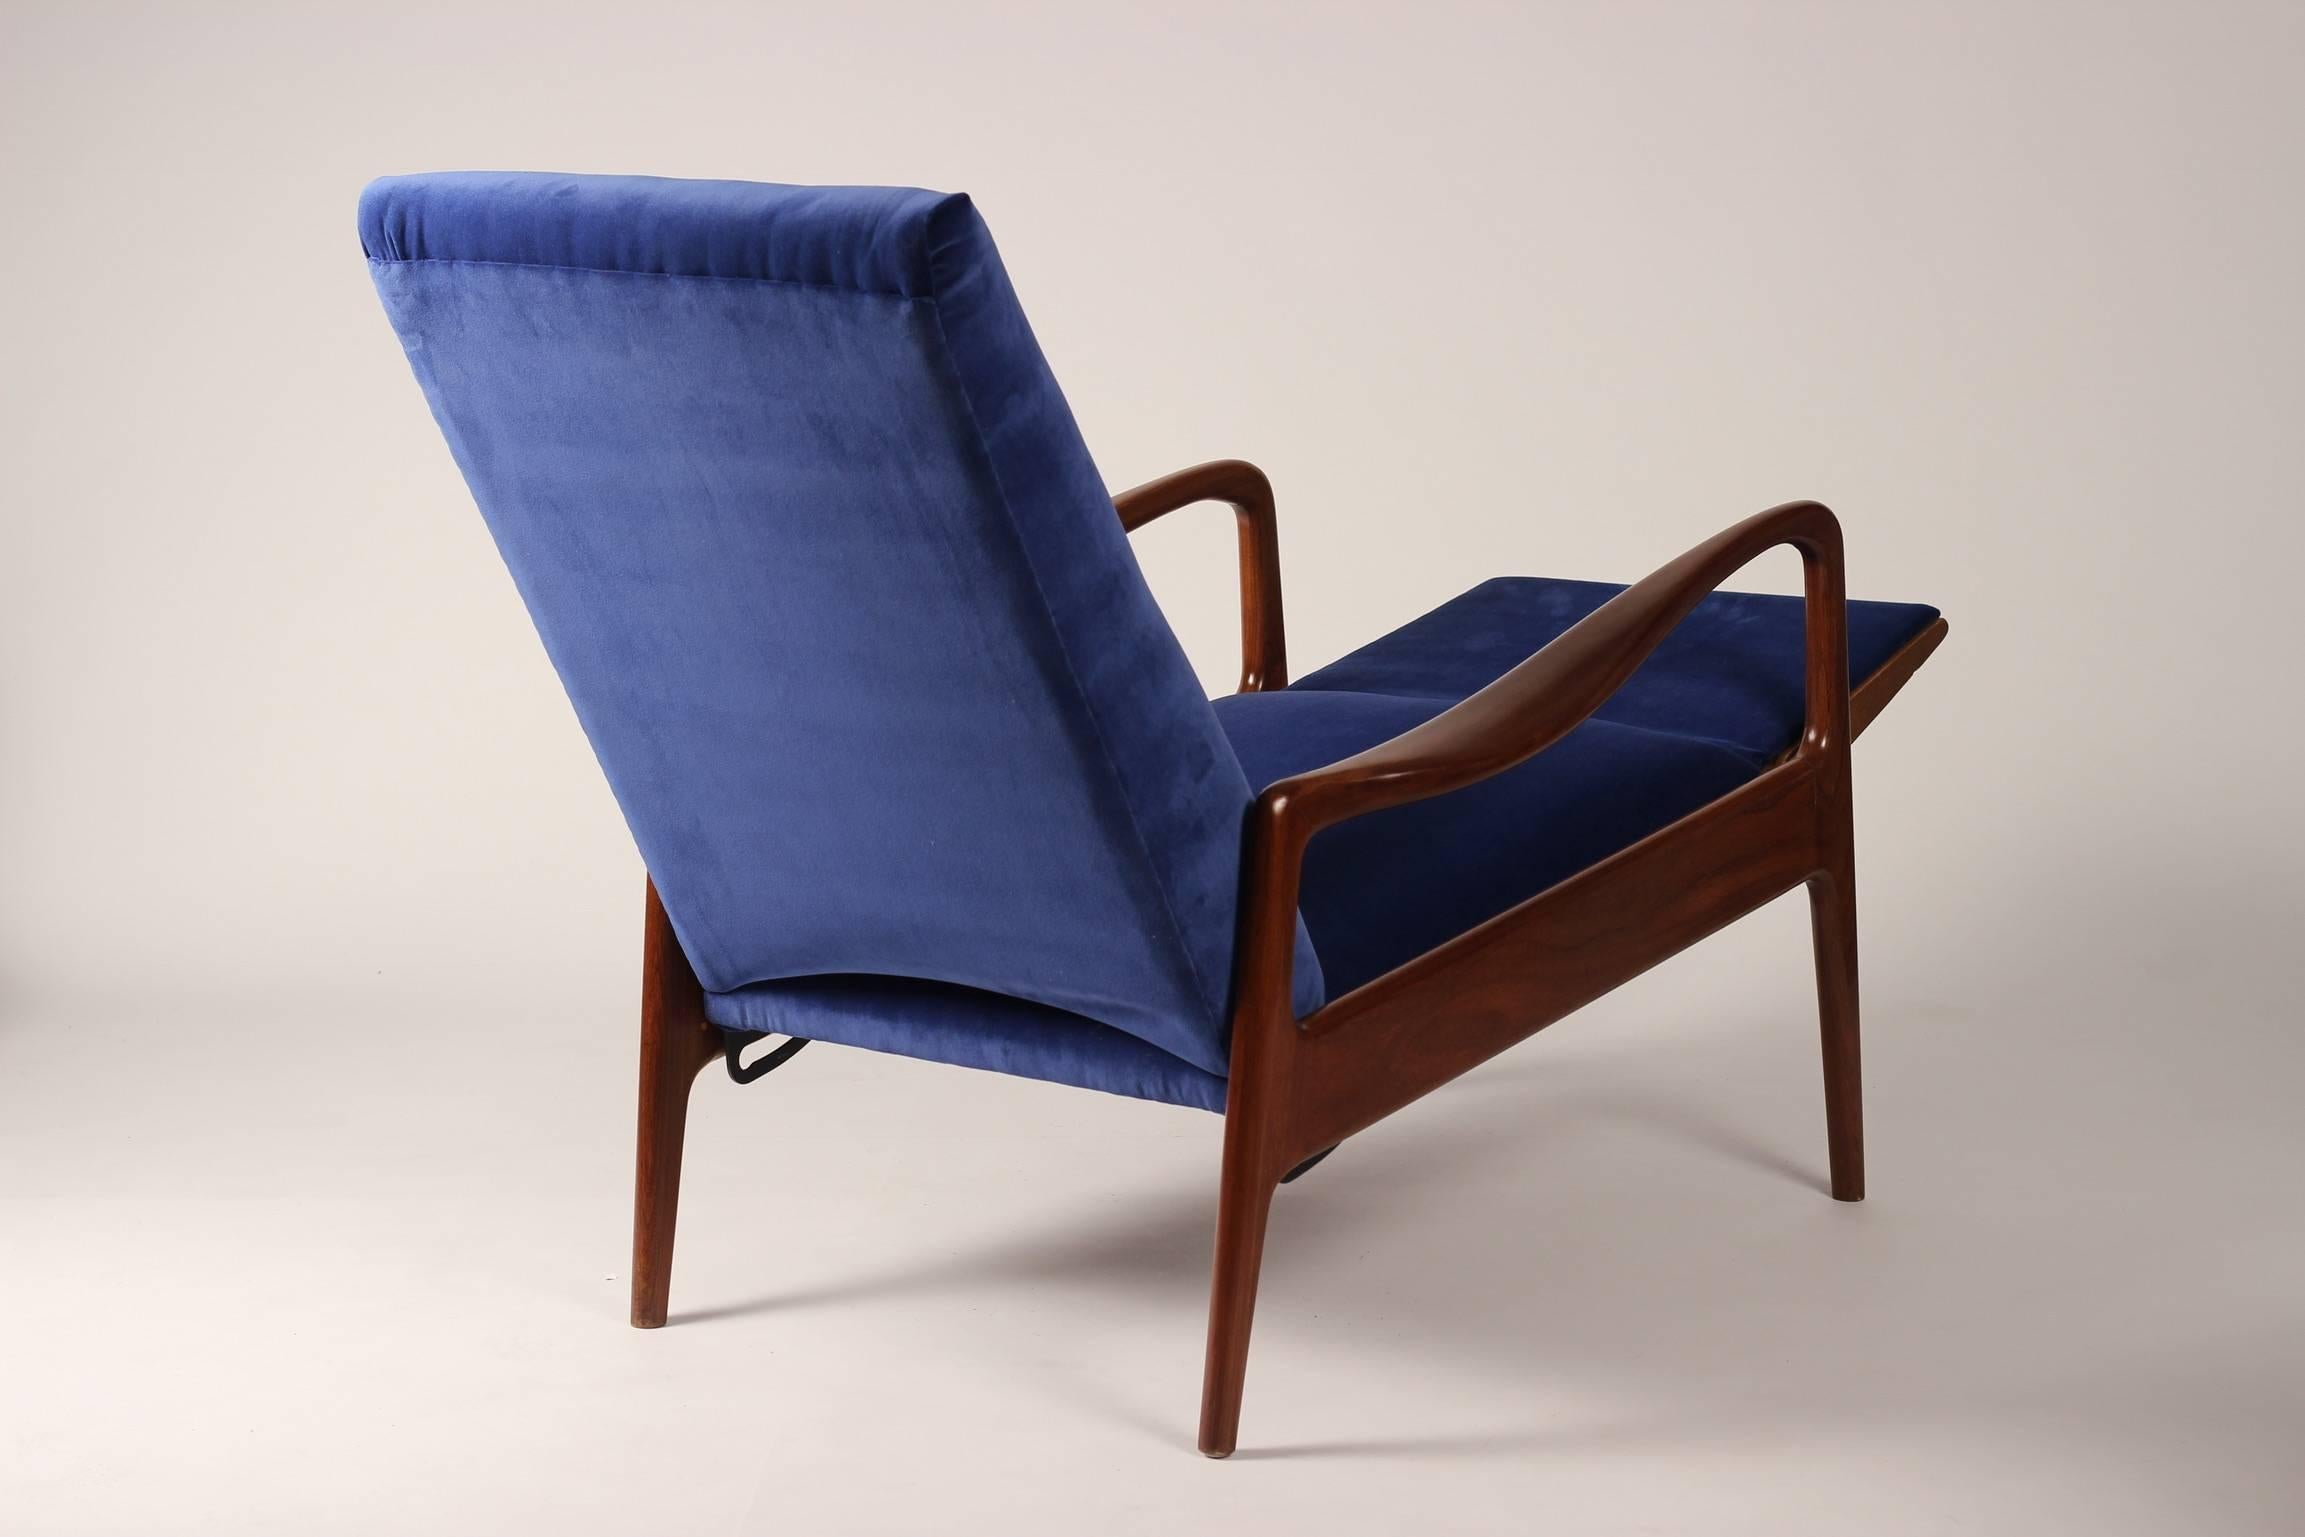 Velvet Mid-Century Modern Reclining Lounge Chair by Greaves and Thomas